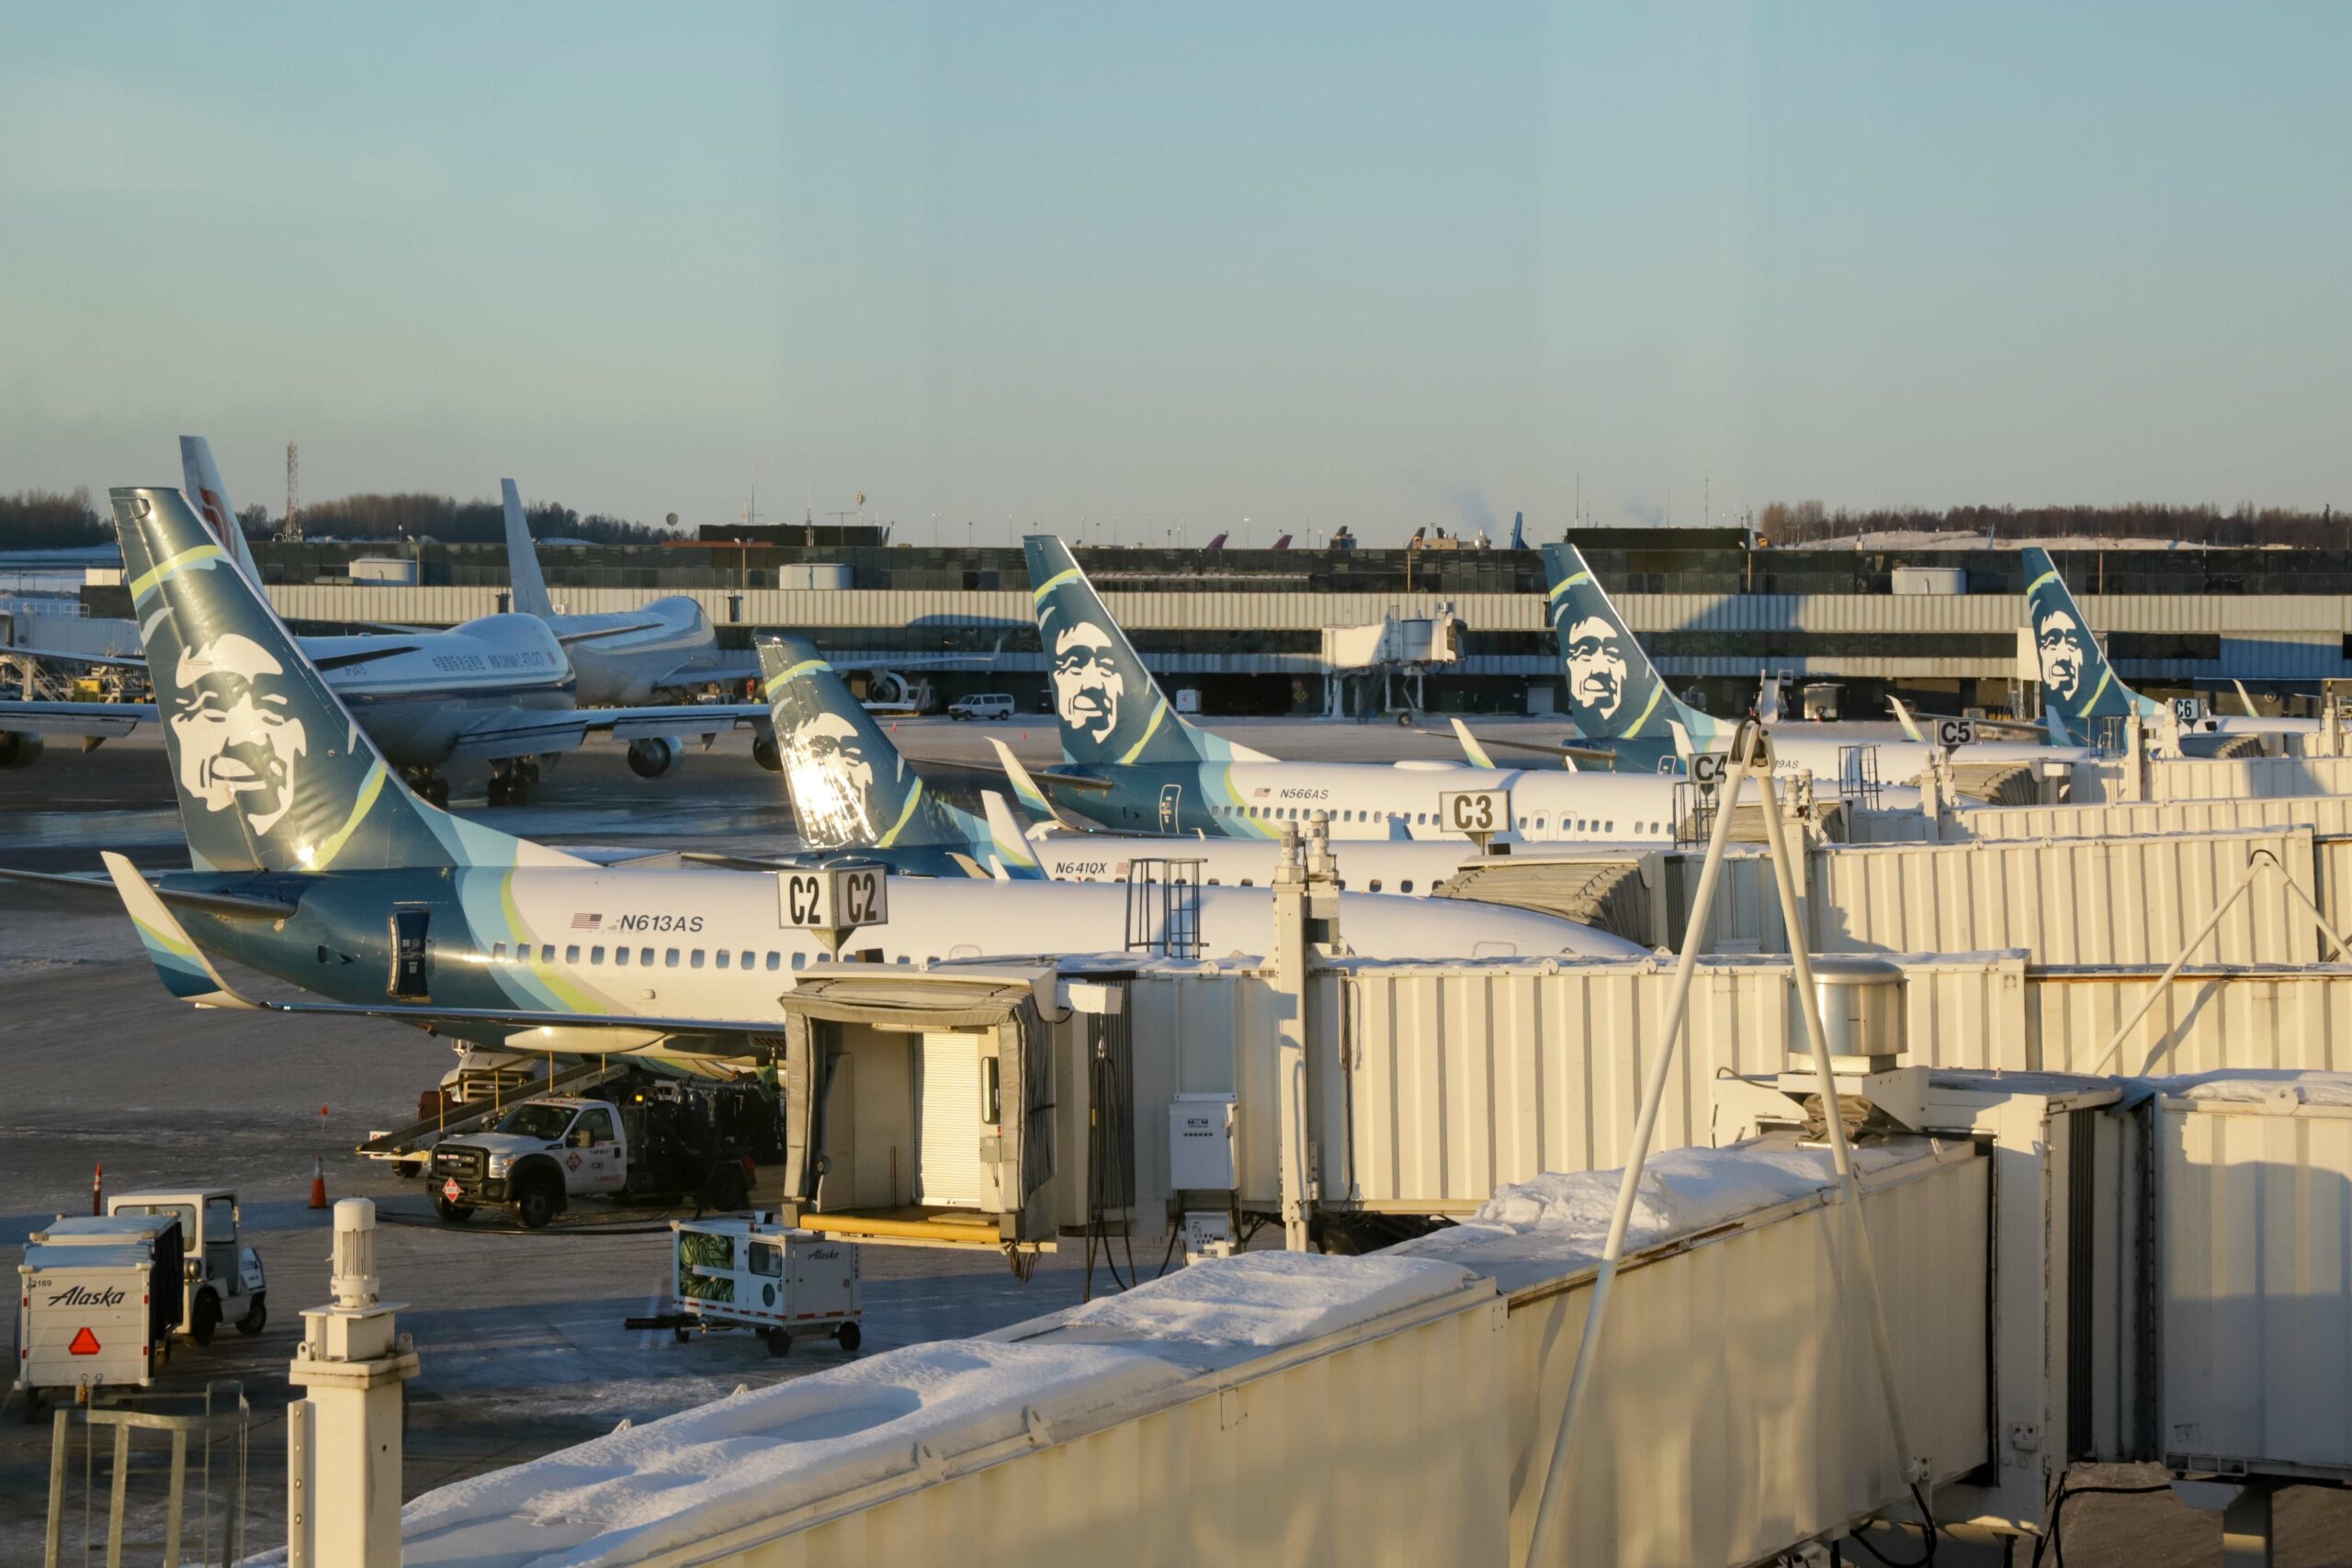 Five Alaska Airlines planes parked at the gate